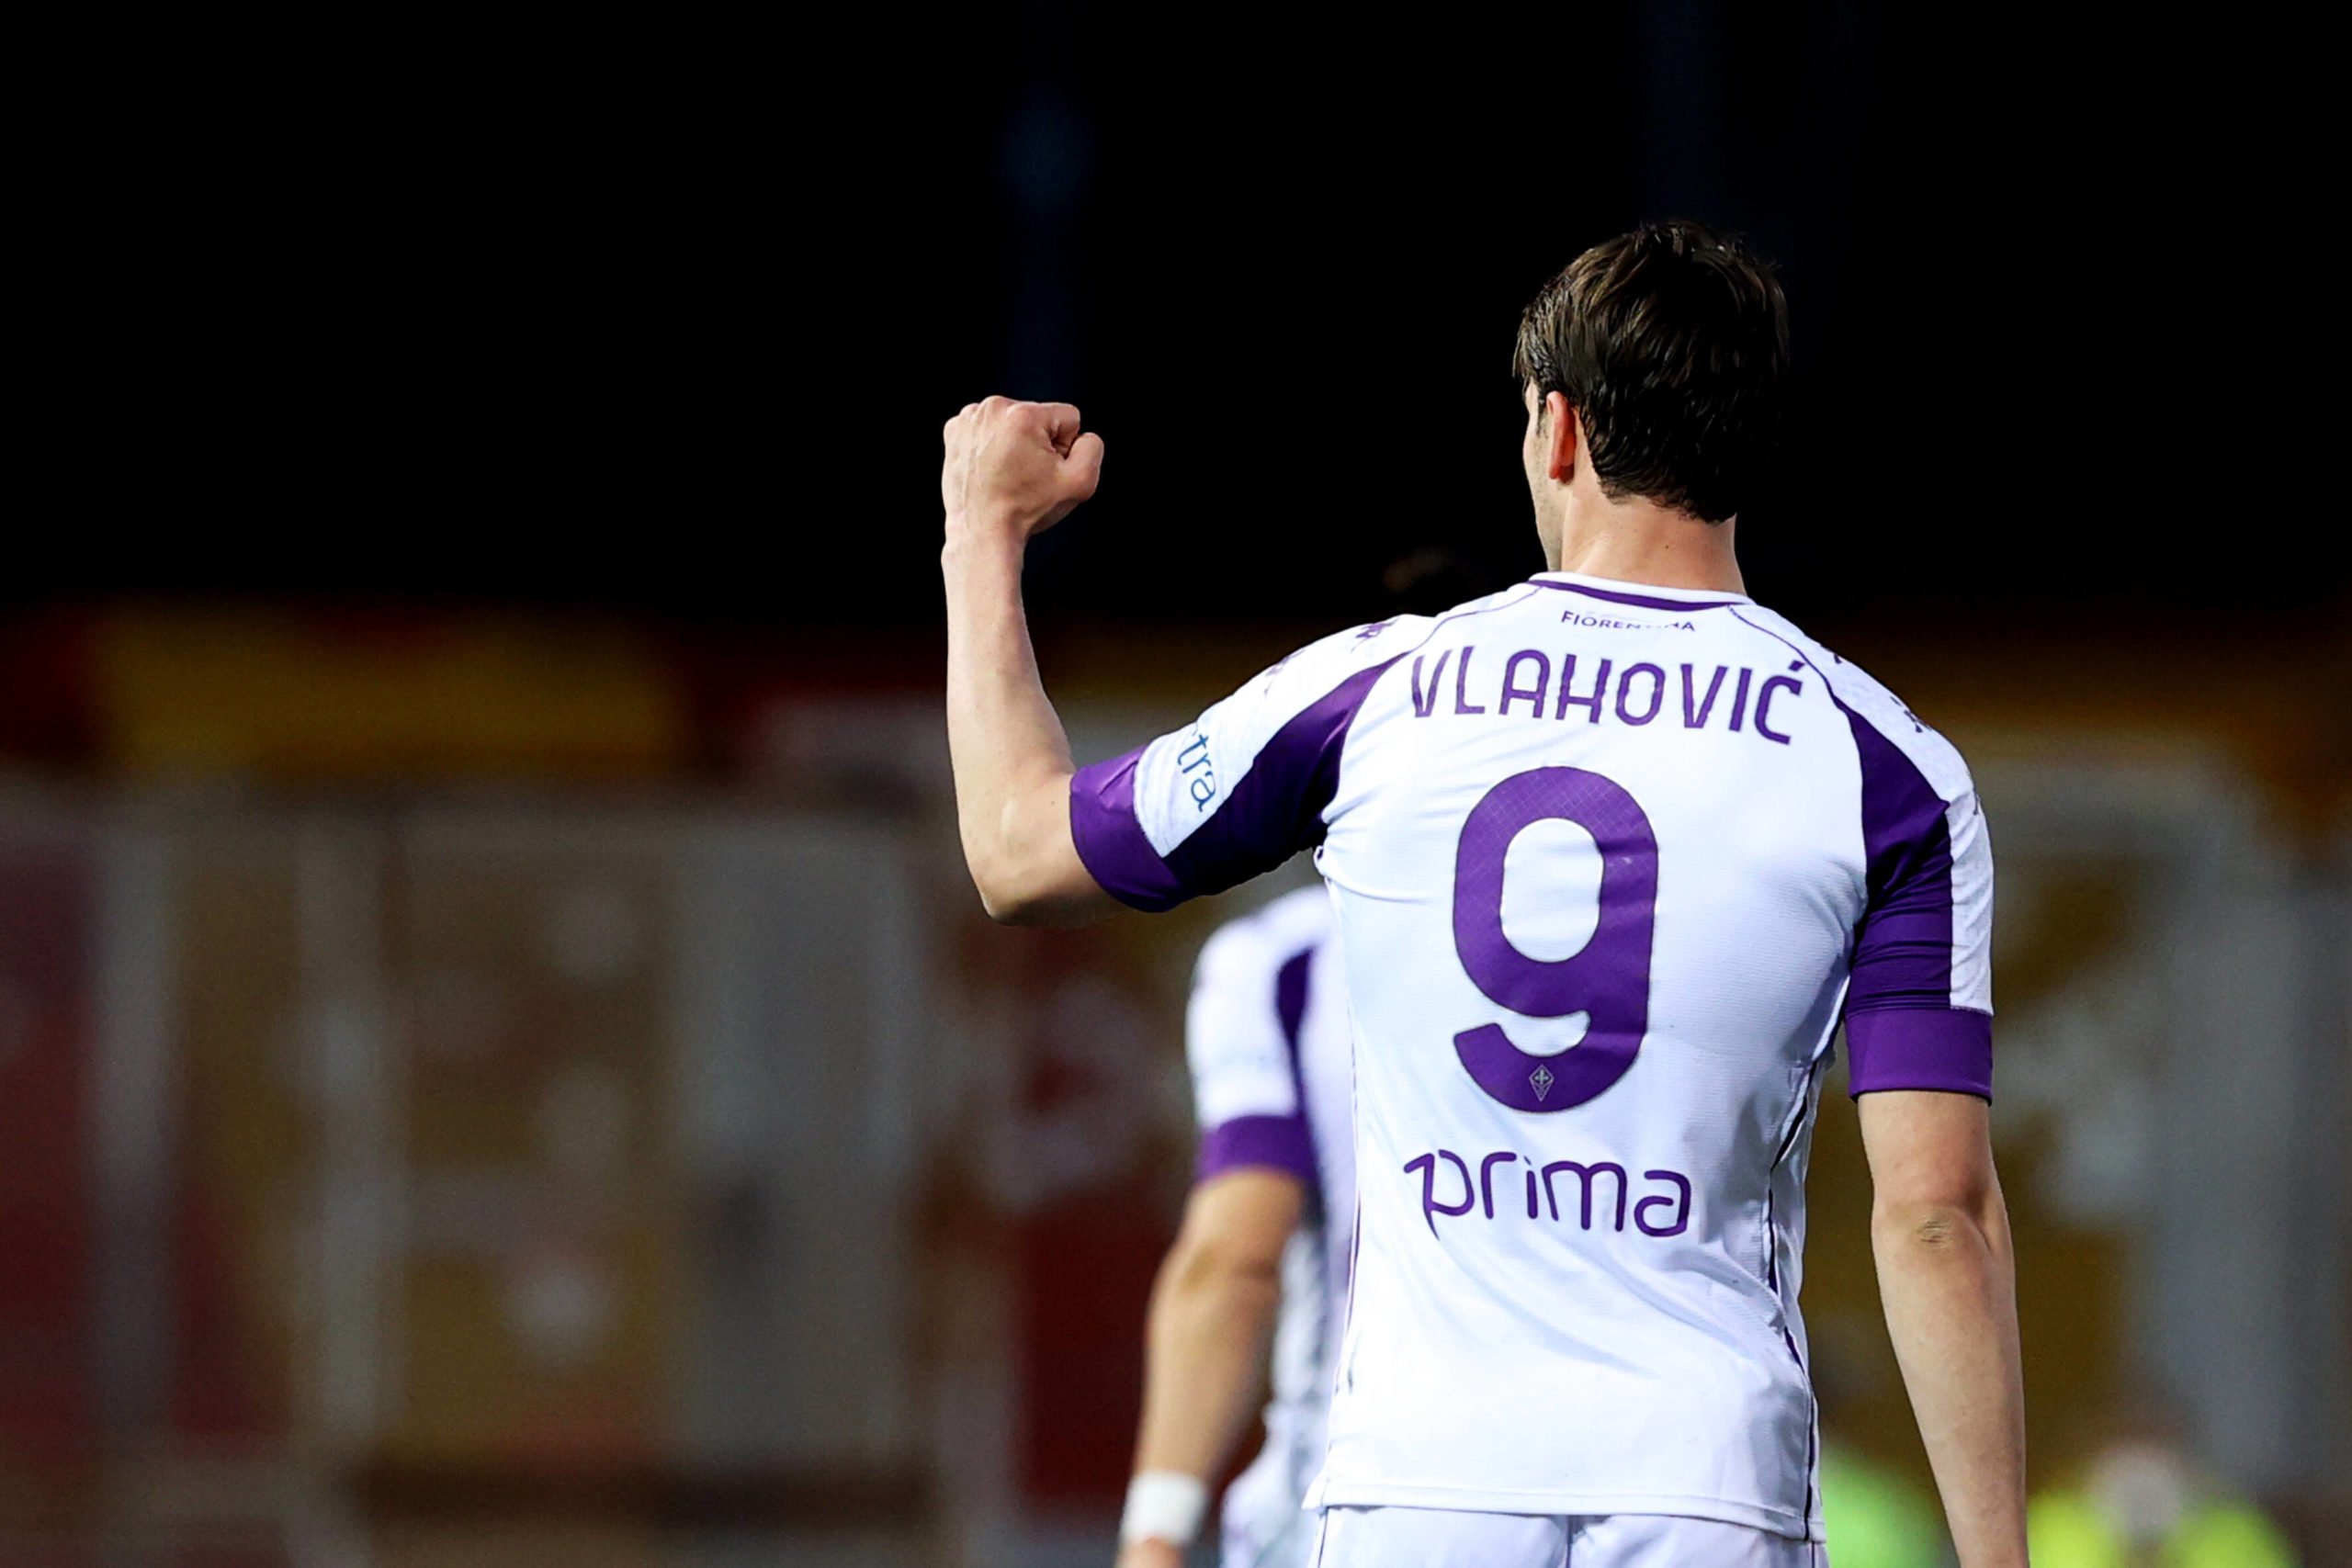 Tottenham Hotspur eyeing a move for Vlahovic who is seen in the photo